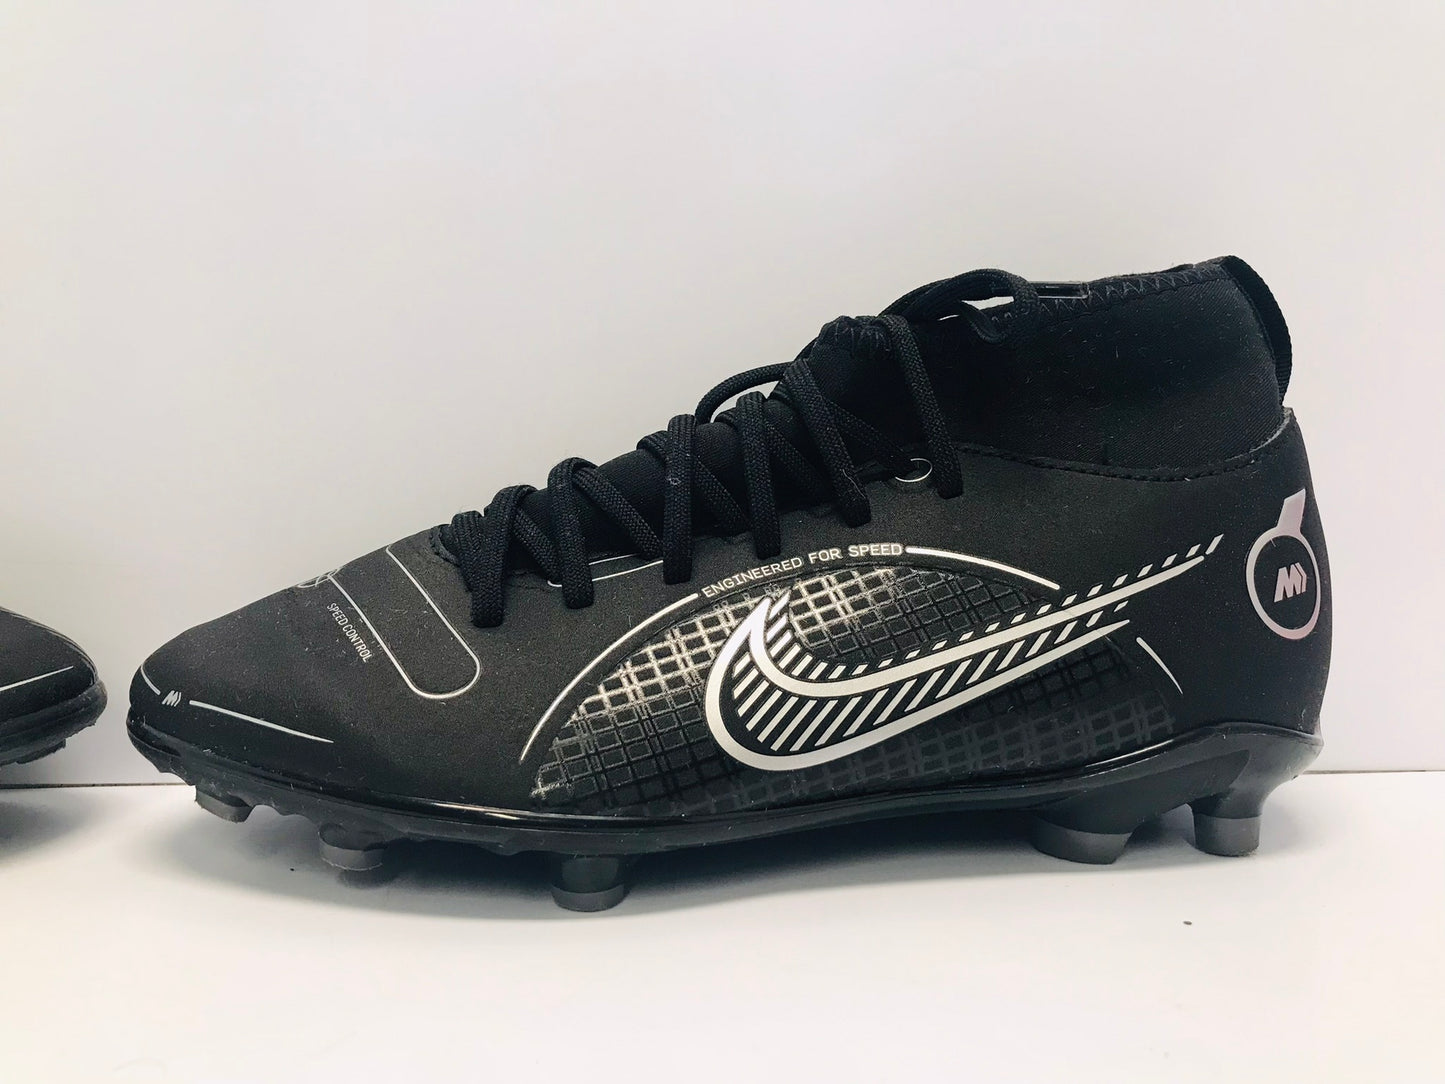 Soccer Football Shoes Cleats Child Size 4 Nike Black Silver Slipper Foot Like New